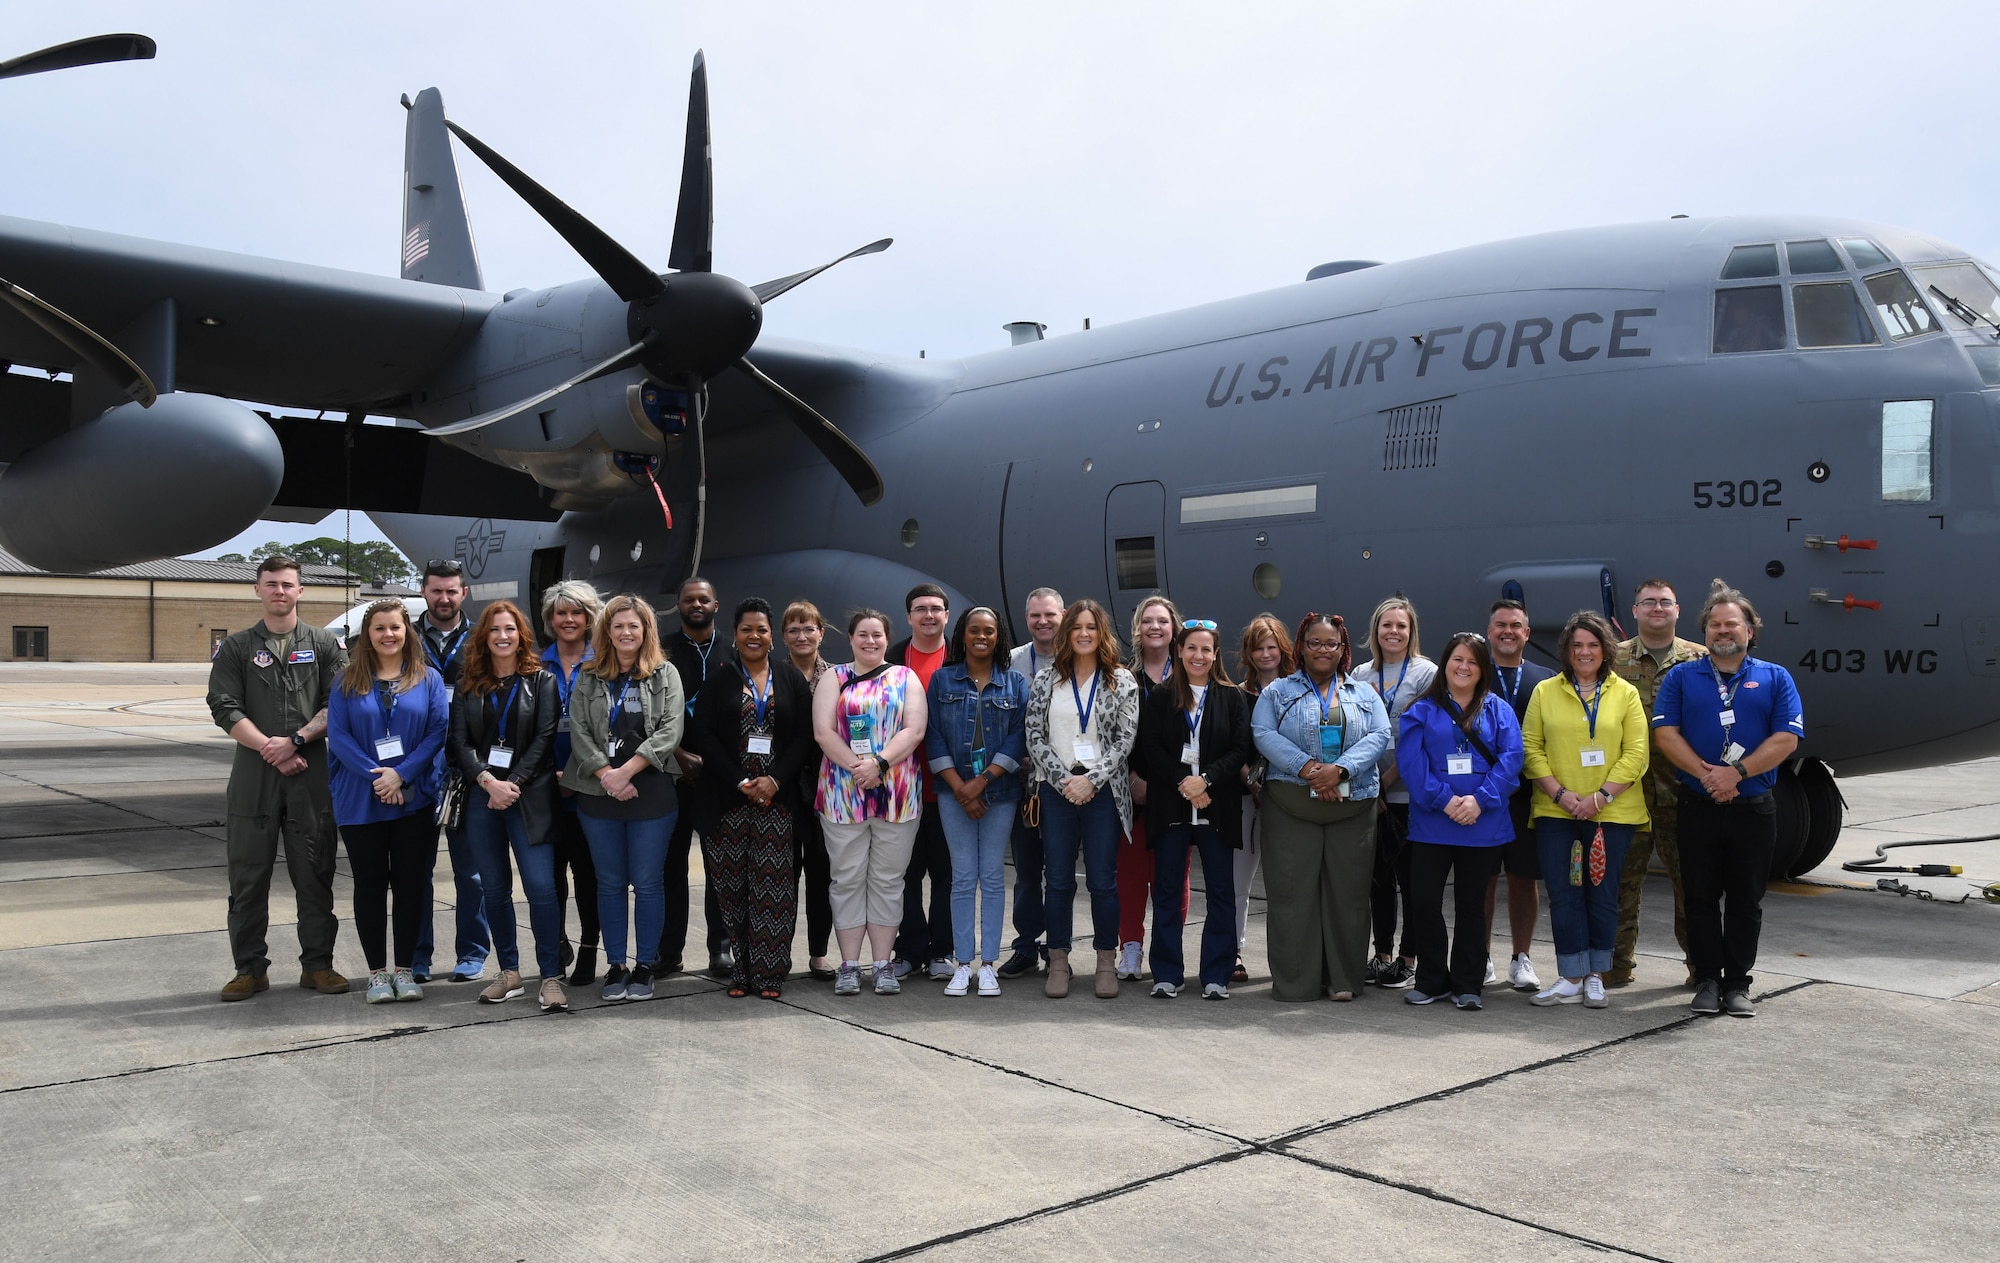 Members of the Association for Career and Technical Education pose for a group photo in front of a WC-130 Hercules aircraft for a tour at Keesler Air Force Base, Mississippi, March 29, 2023.